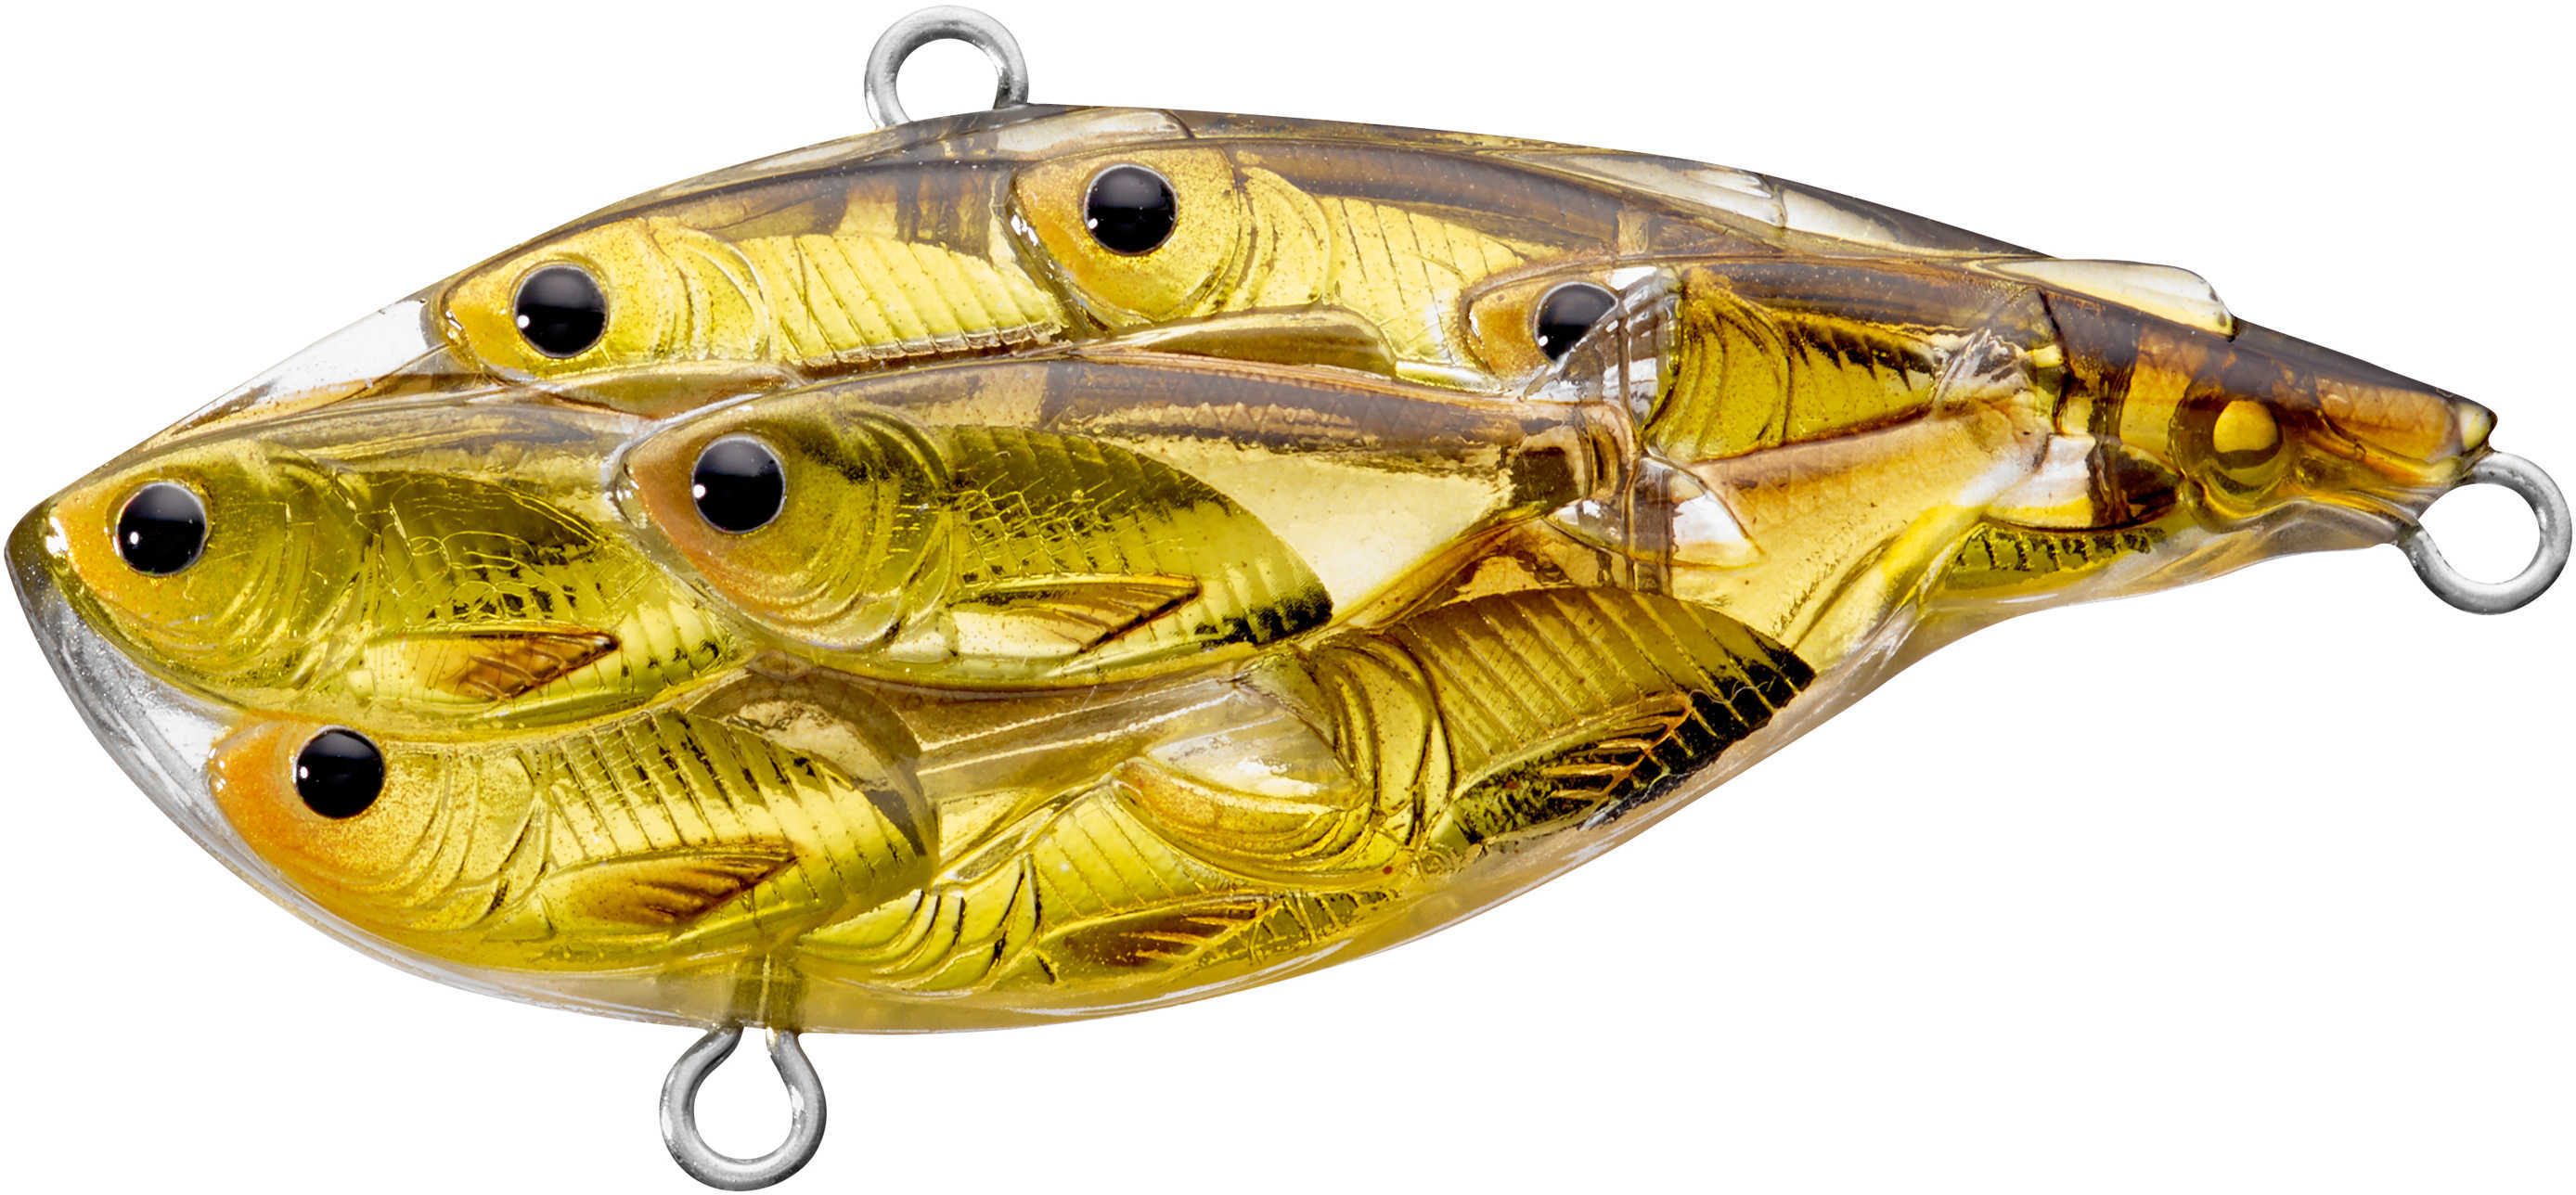 LIVETARGET Lures / Koppers Fishing and Tackle Corp Yearling Baitball Rattlebait Gold/Black #4/#6 Md: YRB65Sk814